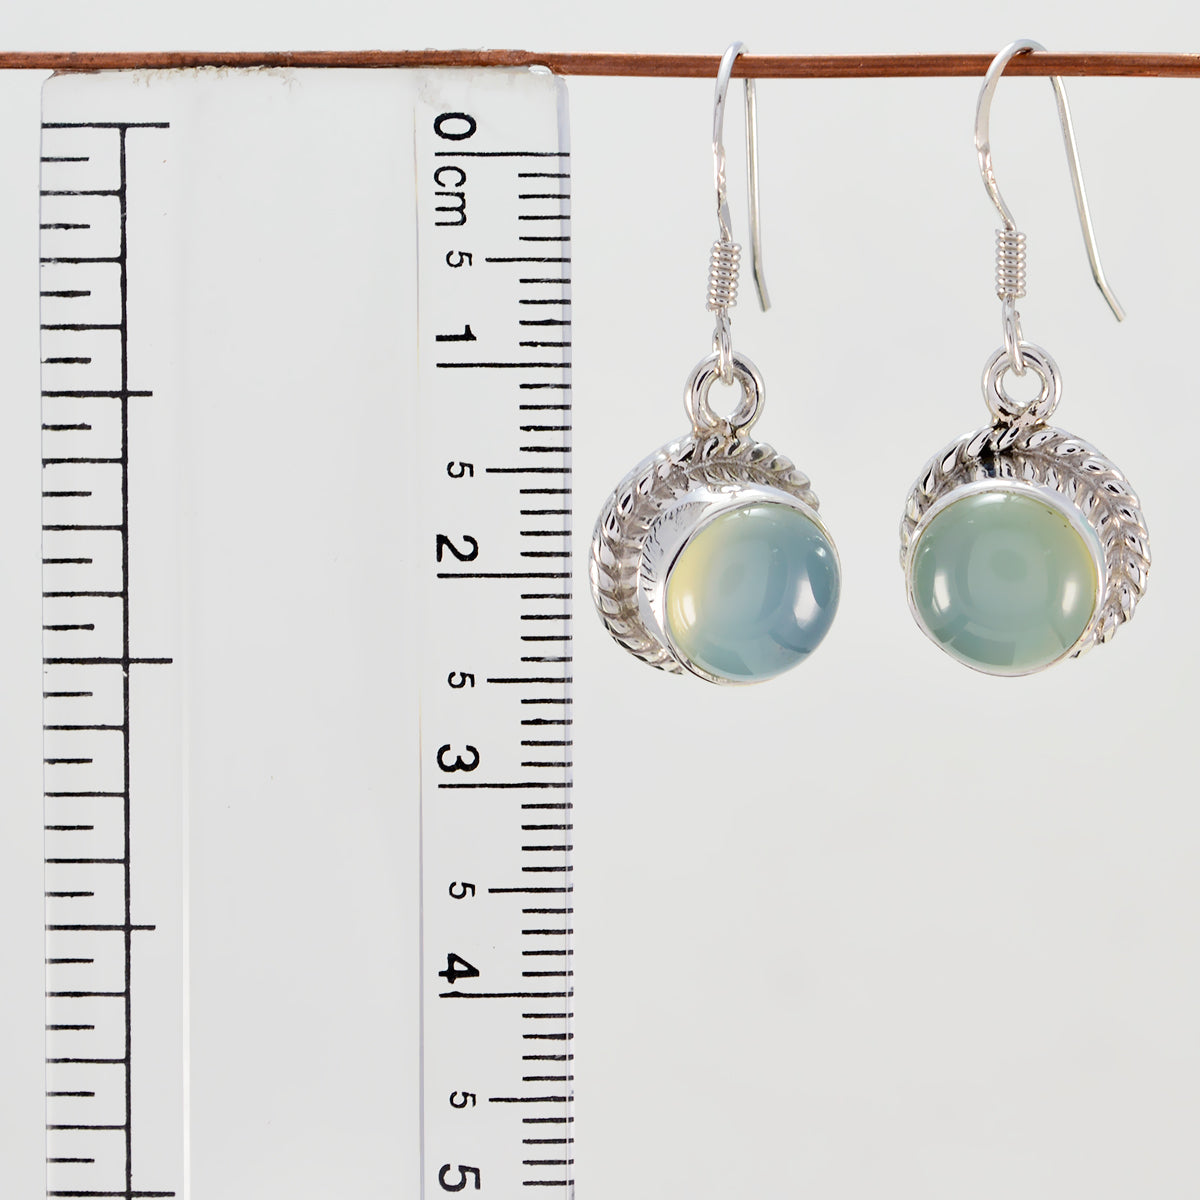 Riyo Genuine Gems round Cabochon Blue Chalcedony Silver Earrings gift for st. patricks day